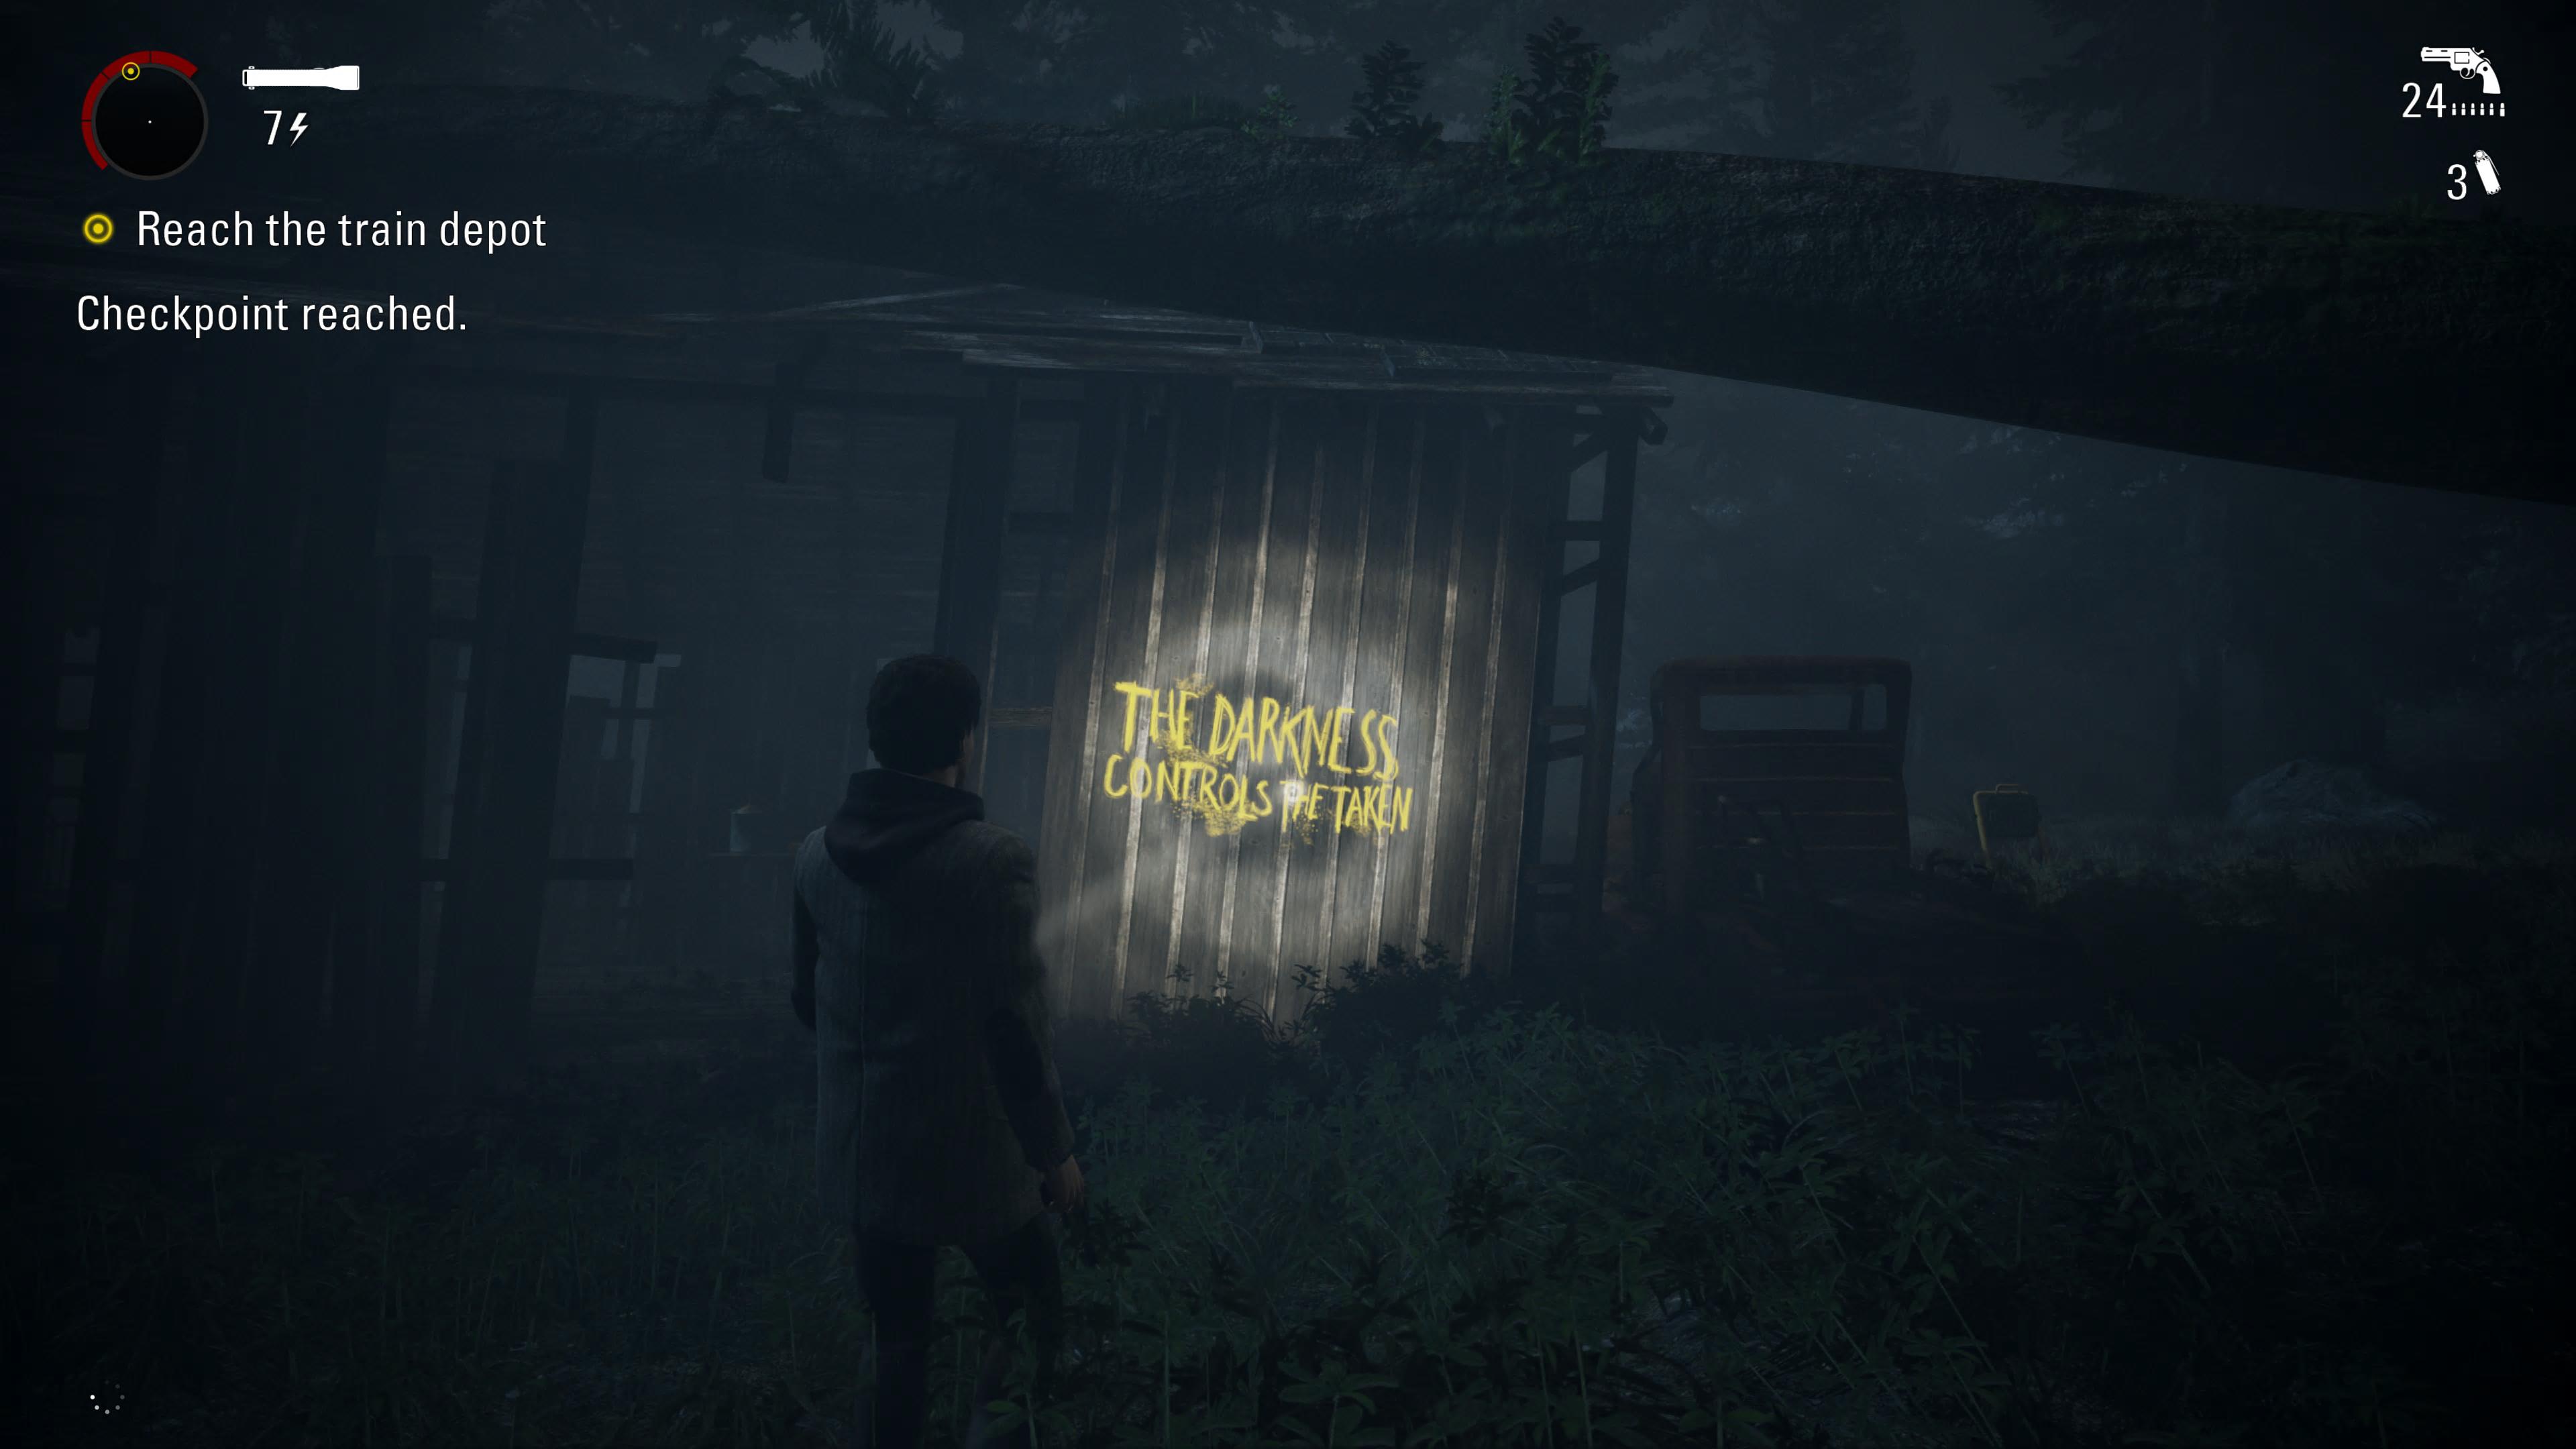 Alan Wake Remastered differences: All new improvements in 2021